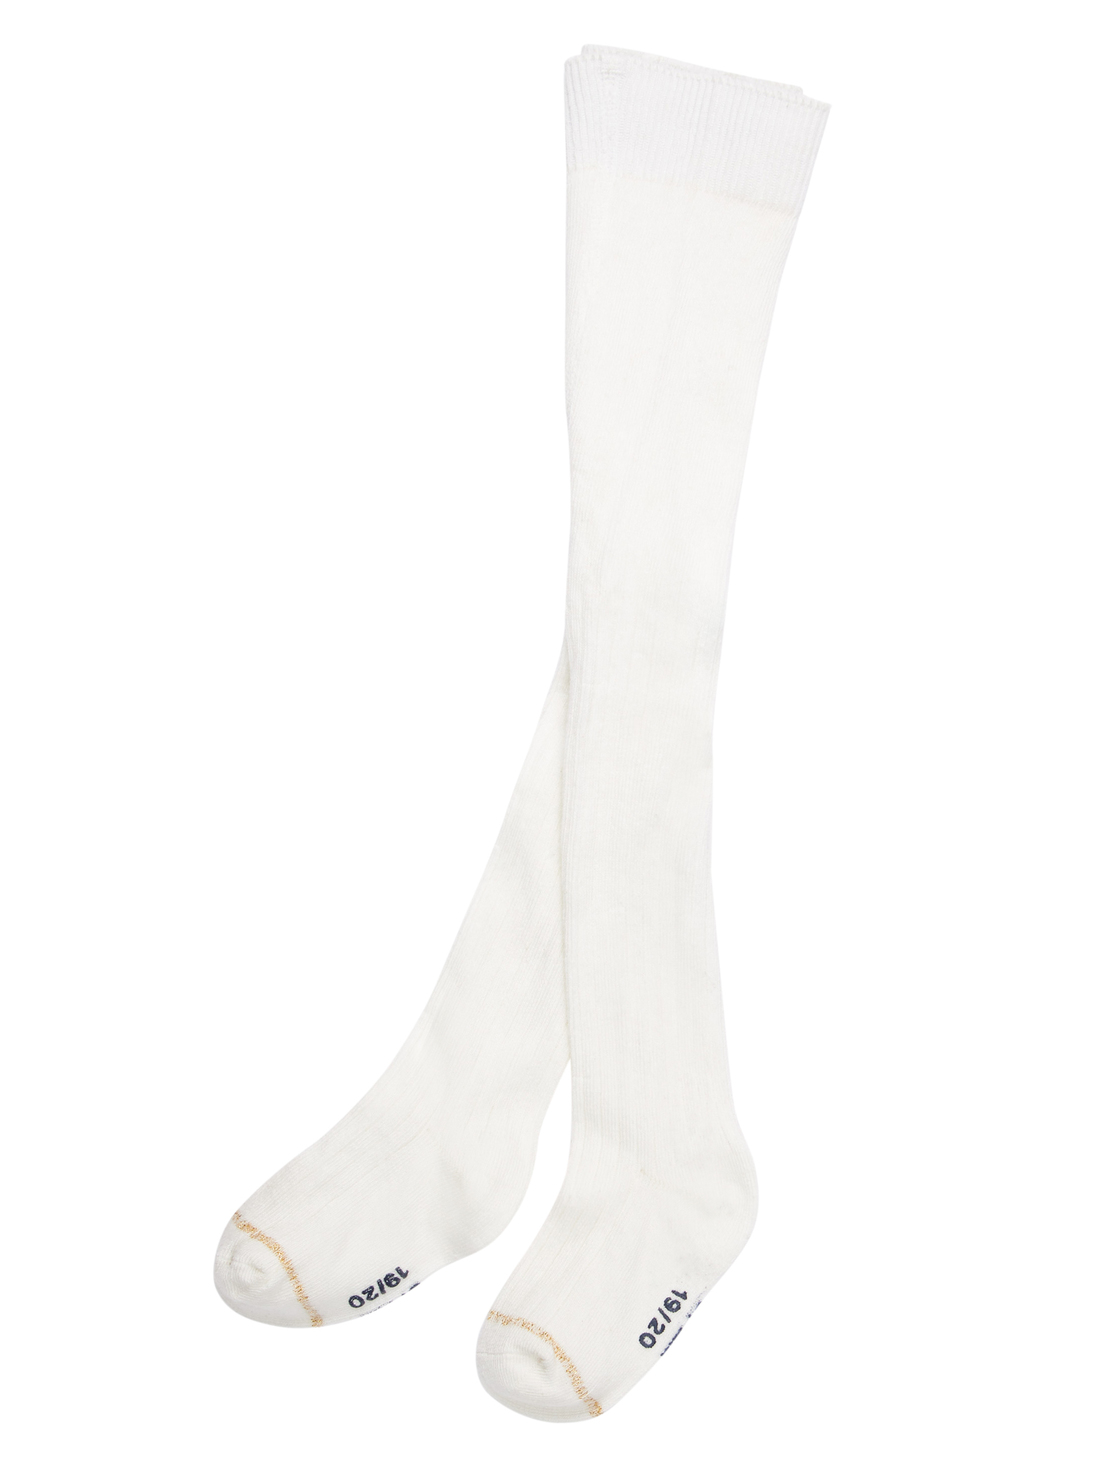 Off white Tights : buy online - Our casual clothes | DPAM International ...